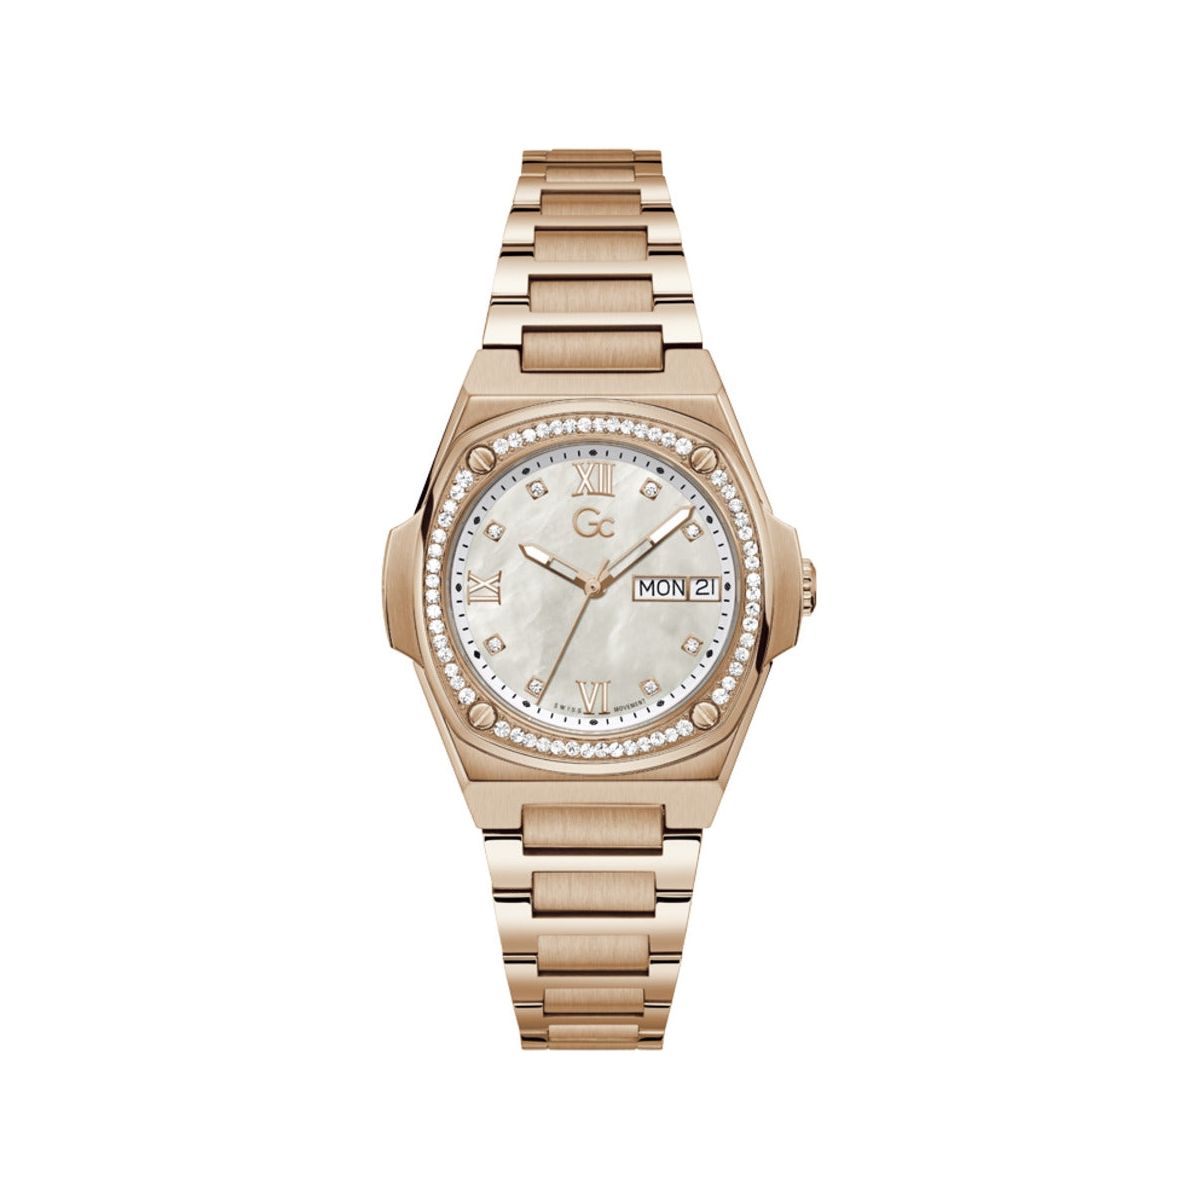 GUESS COLLECTION GUESS COLLECTION WATCHES Mod. Y98002L1MF WATCHES guess-collection-watches-mod-y98002l1mf